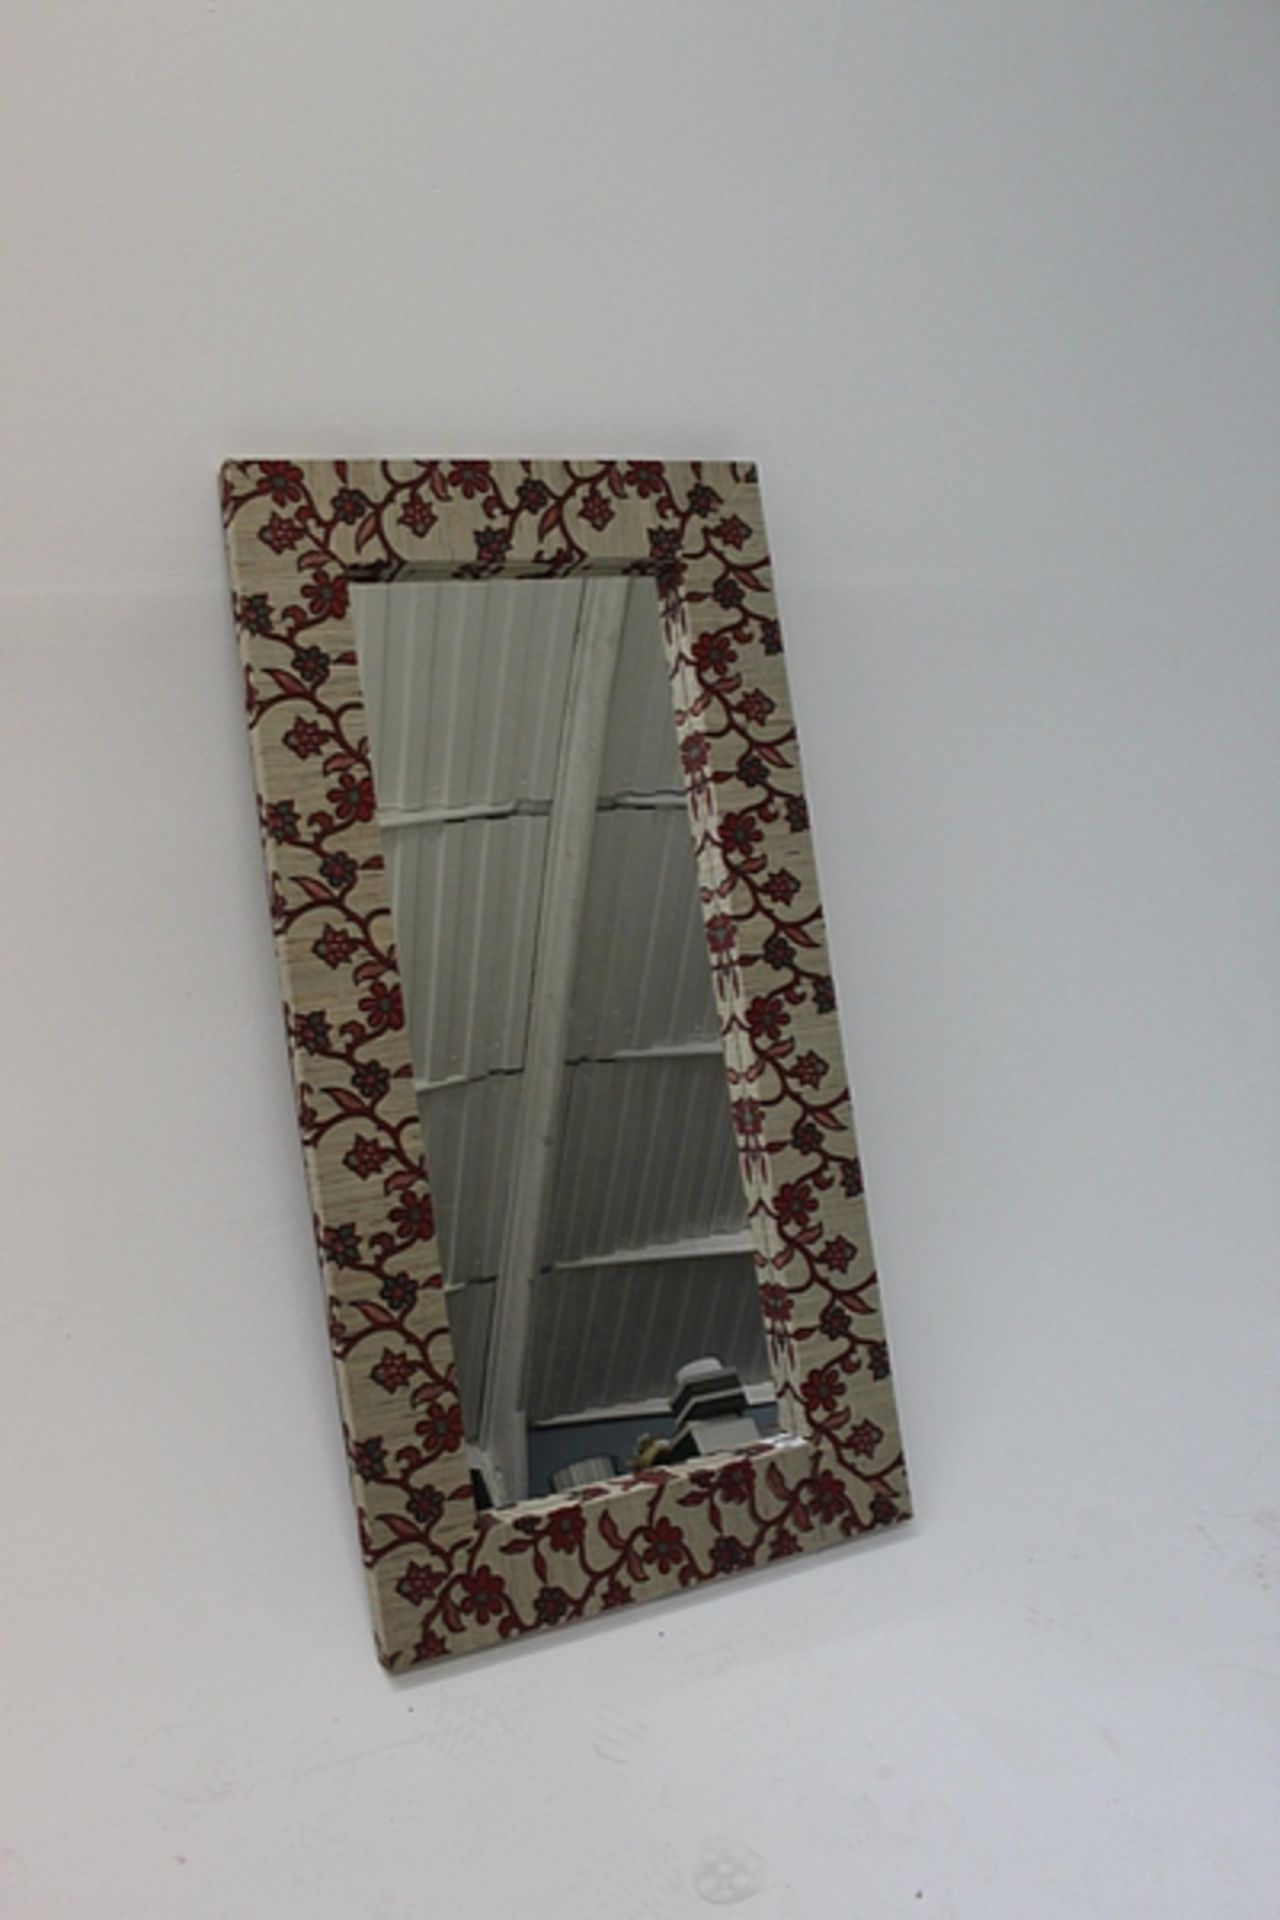 Floor Mirror Woven Reed Mirror Red Flower Motif This Range Of Mirrors Are Made From Natural